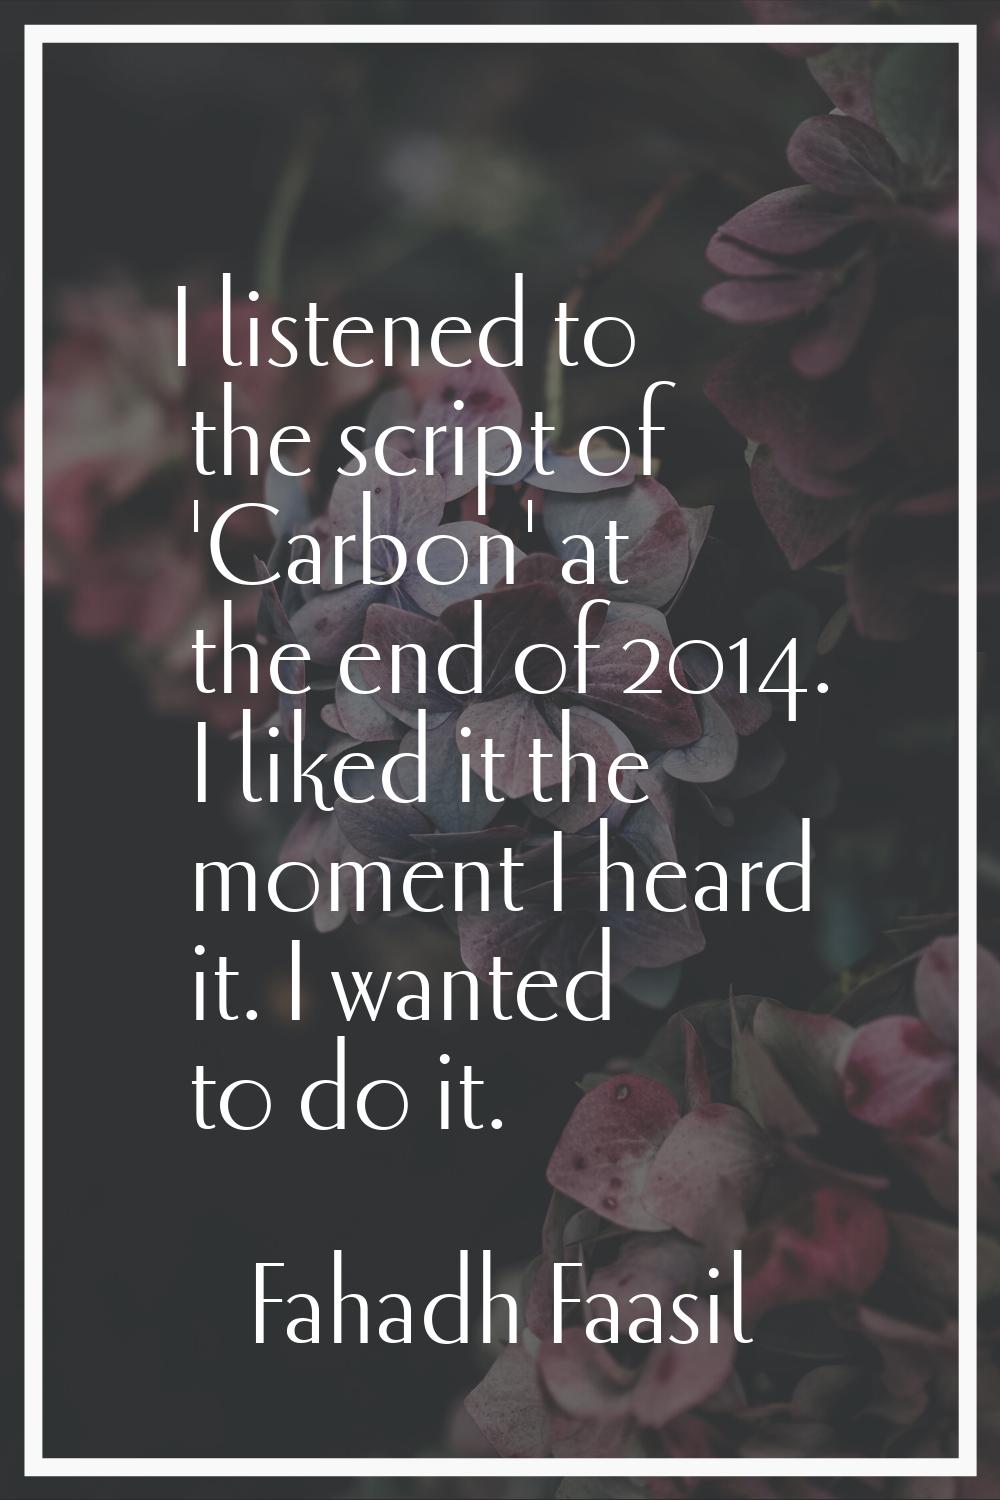 I listened to the script of 'Carbon' at the end of 2014. I liked it the moment I heard it. I wanted